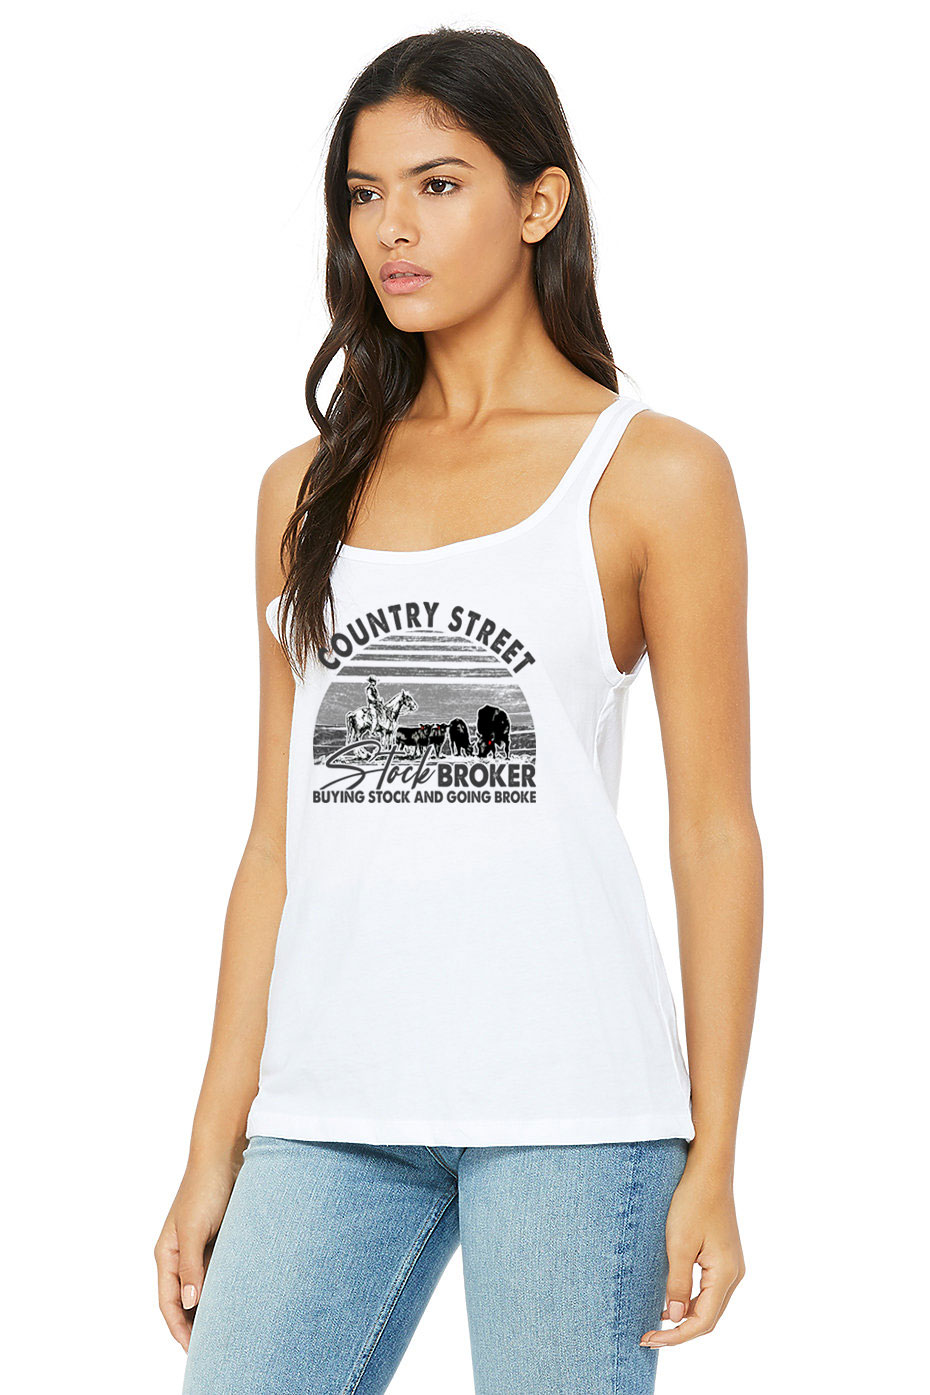 Women’s Tank Top Country Street Stock Brocker Buying Stock And Going ...